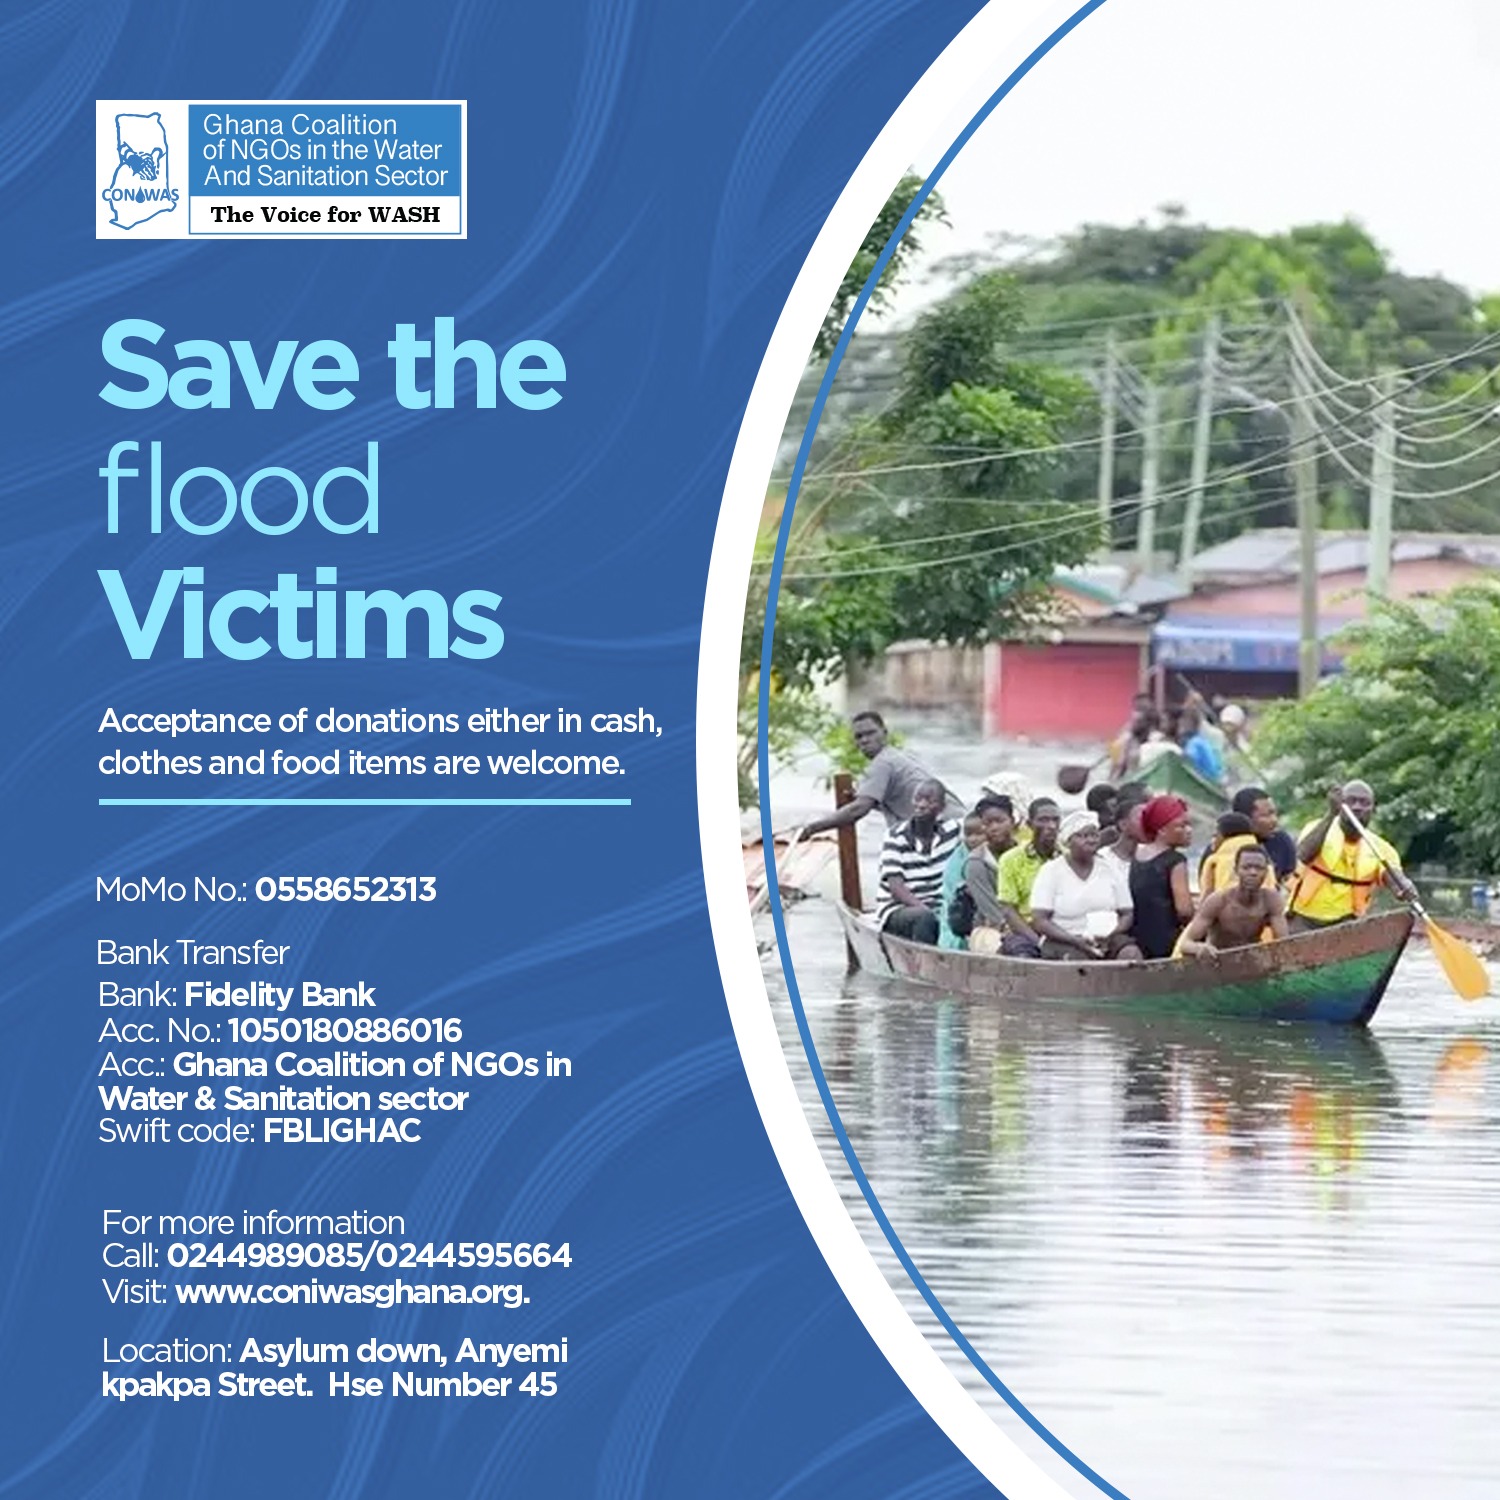 SAVE THE FLOOD VICTIMS